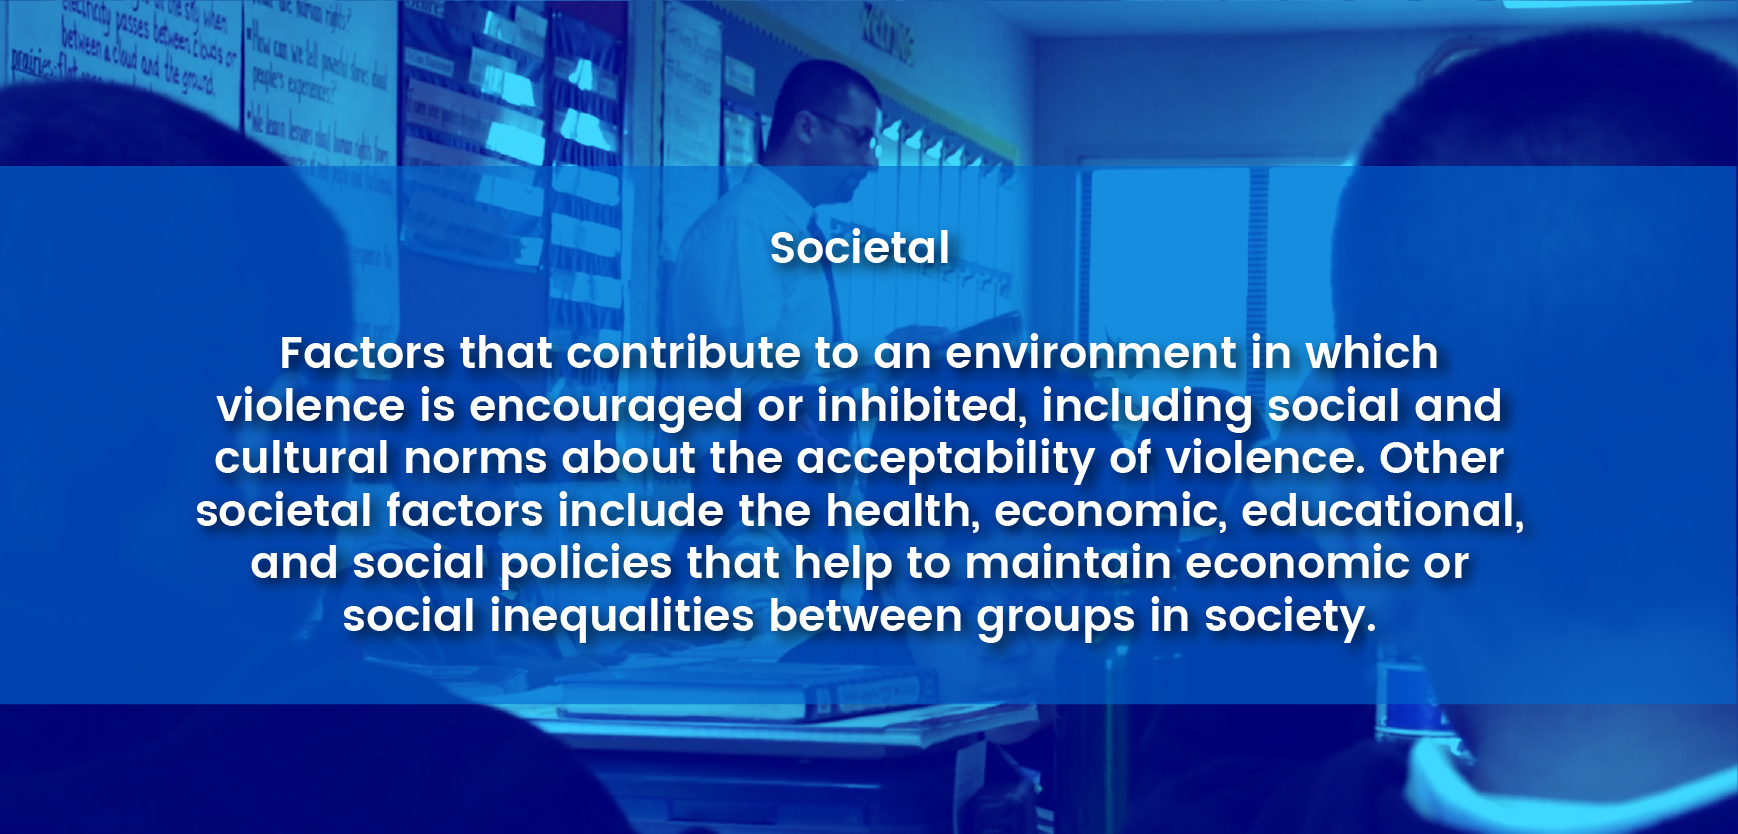 Societal - Factors at the societal level are those social and cultural norms that support or inhibit violence as an acceptable way to resolve conflicts. Large societal factors include health, economic, and social policies that help maintain economic or social inequalities between groups in society.